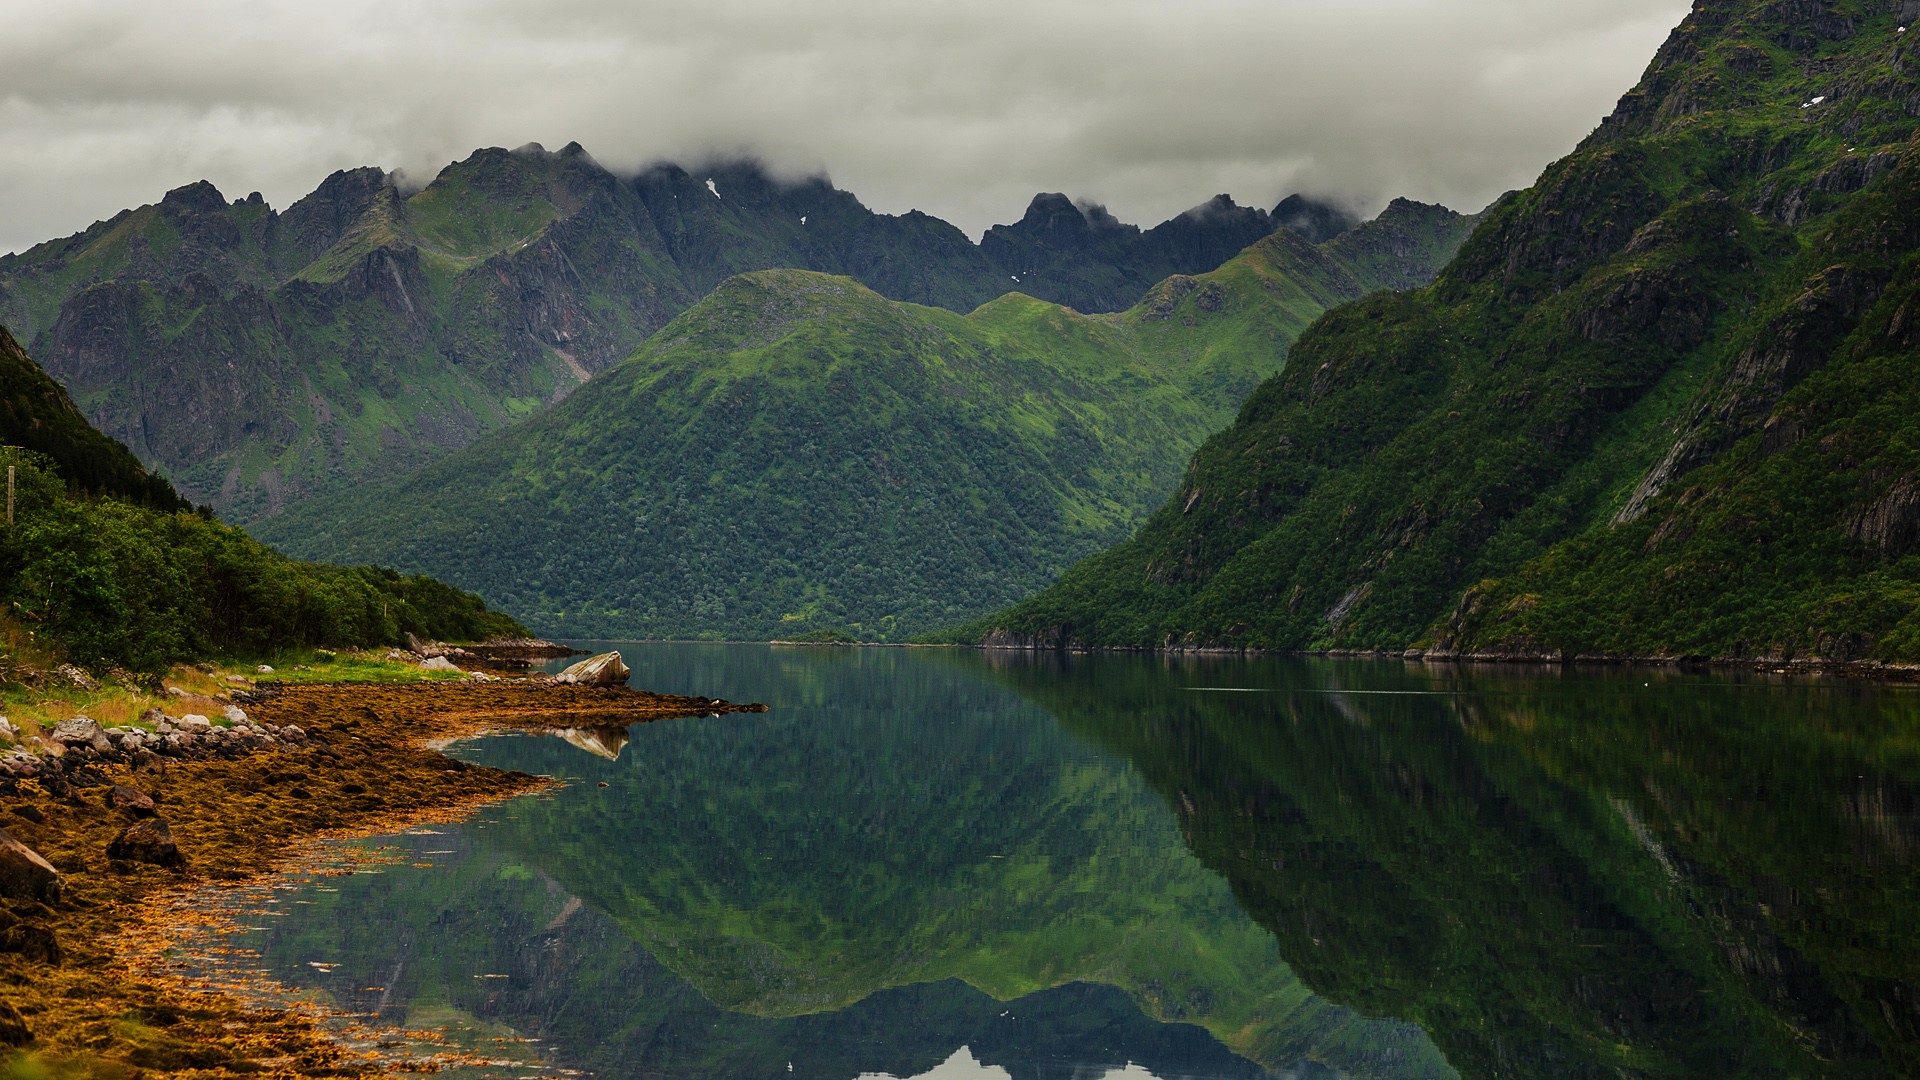 General 1920x1080 nature landscape mountains forest trees river reflection mud clouds mist Monsoon Norway green